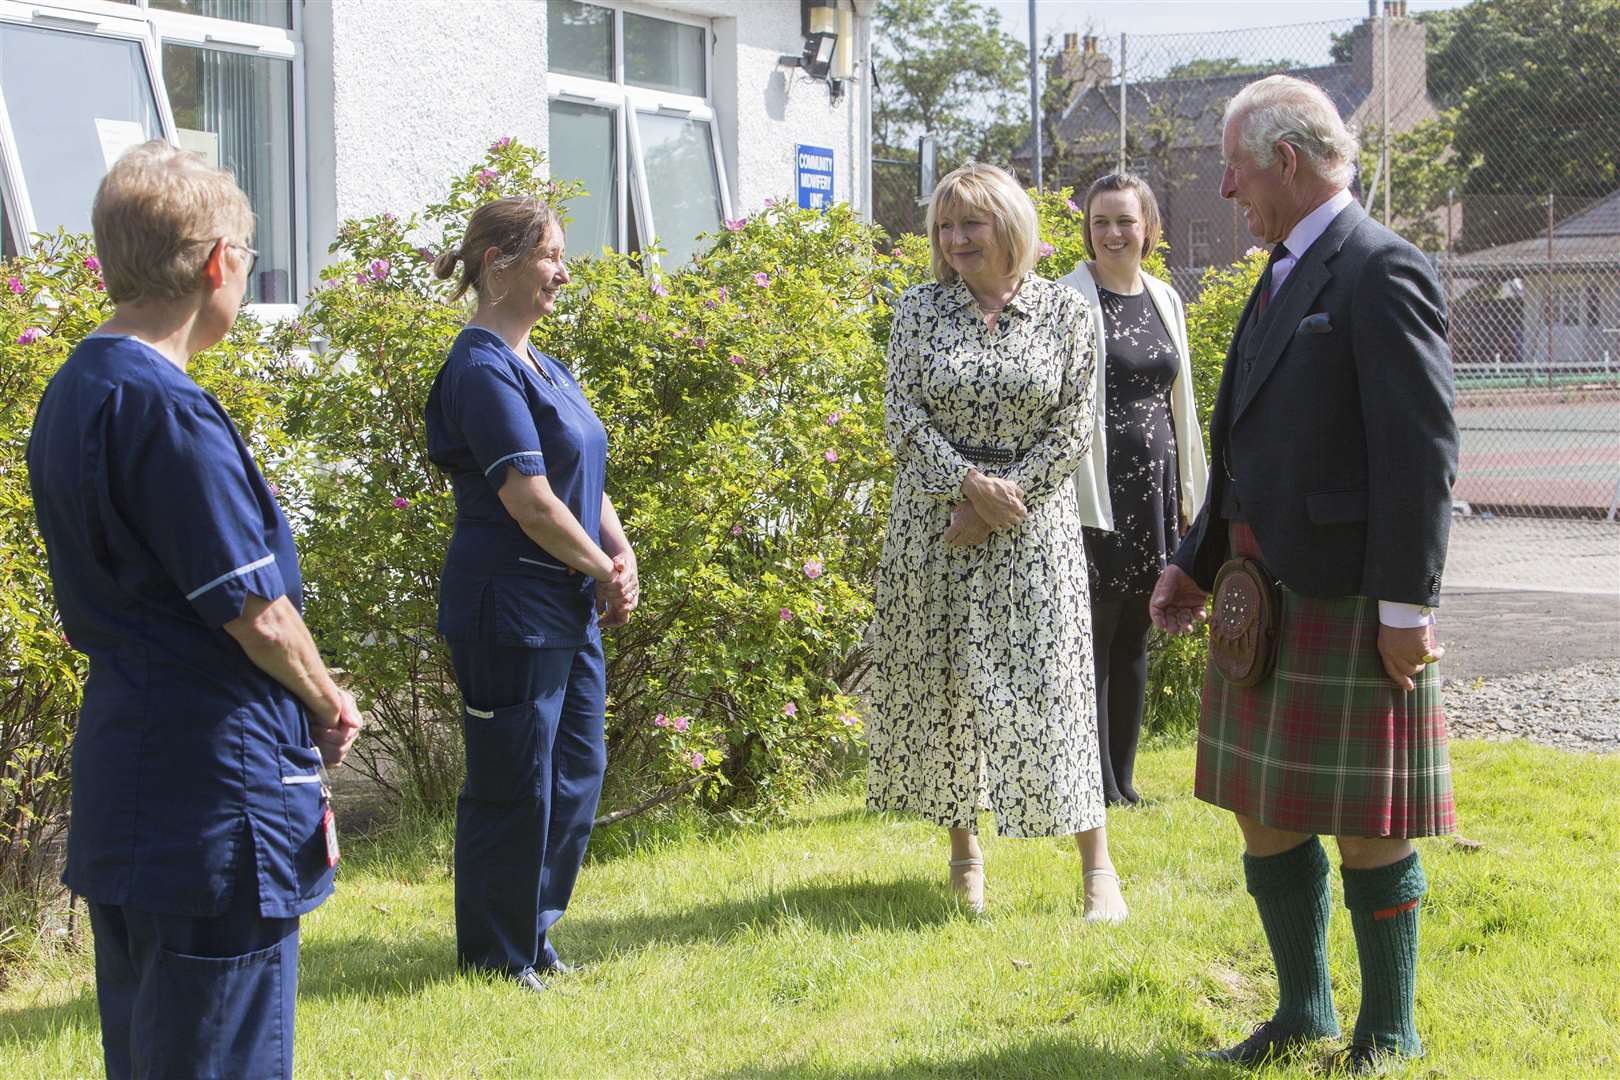 Prince Charles, the Duke of Rothesay, takes time to chat with Pat McGee, charge nurse in the acute medical and surgical admissions ward at Caithness General Hospital, and advanced nurse practitioner Verity Mackay, one of the team leading the infection control ward in Wick, while looking on are hospital manager Pam Garbe and biomedical scientist Laura Taylor. Picture: Robert MacDonald / Northern Studios